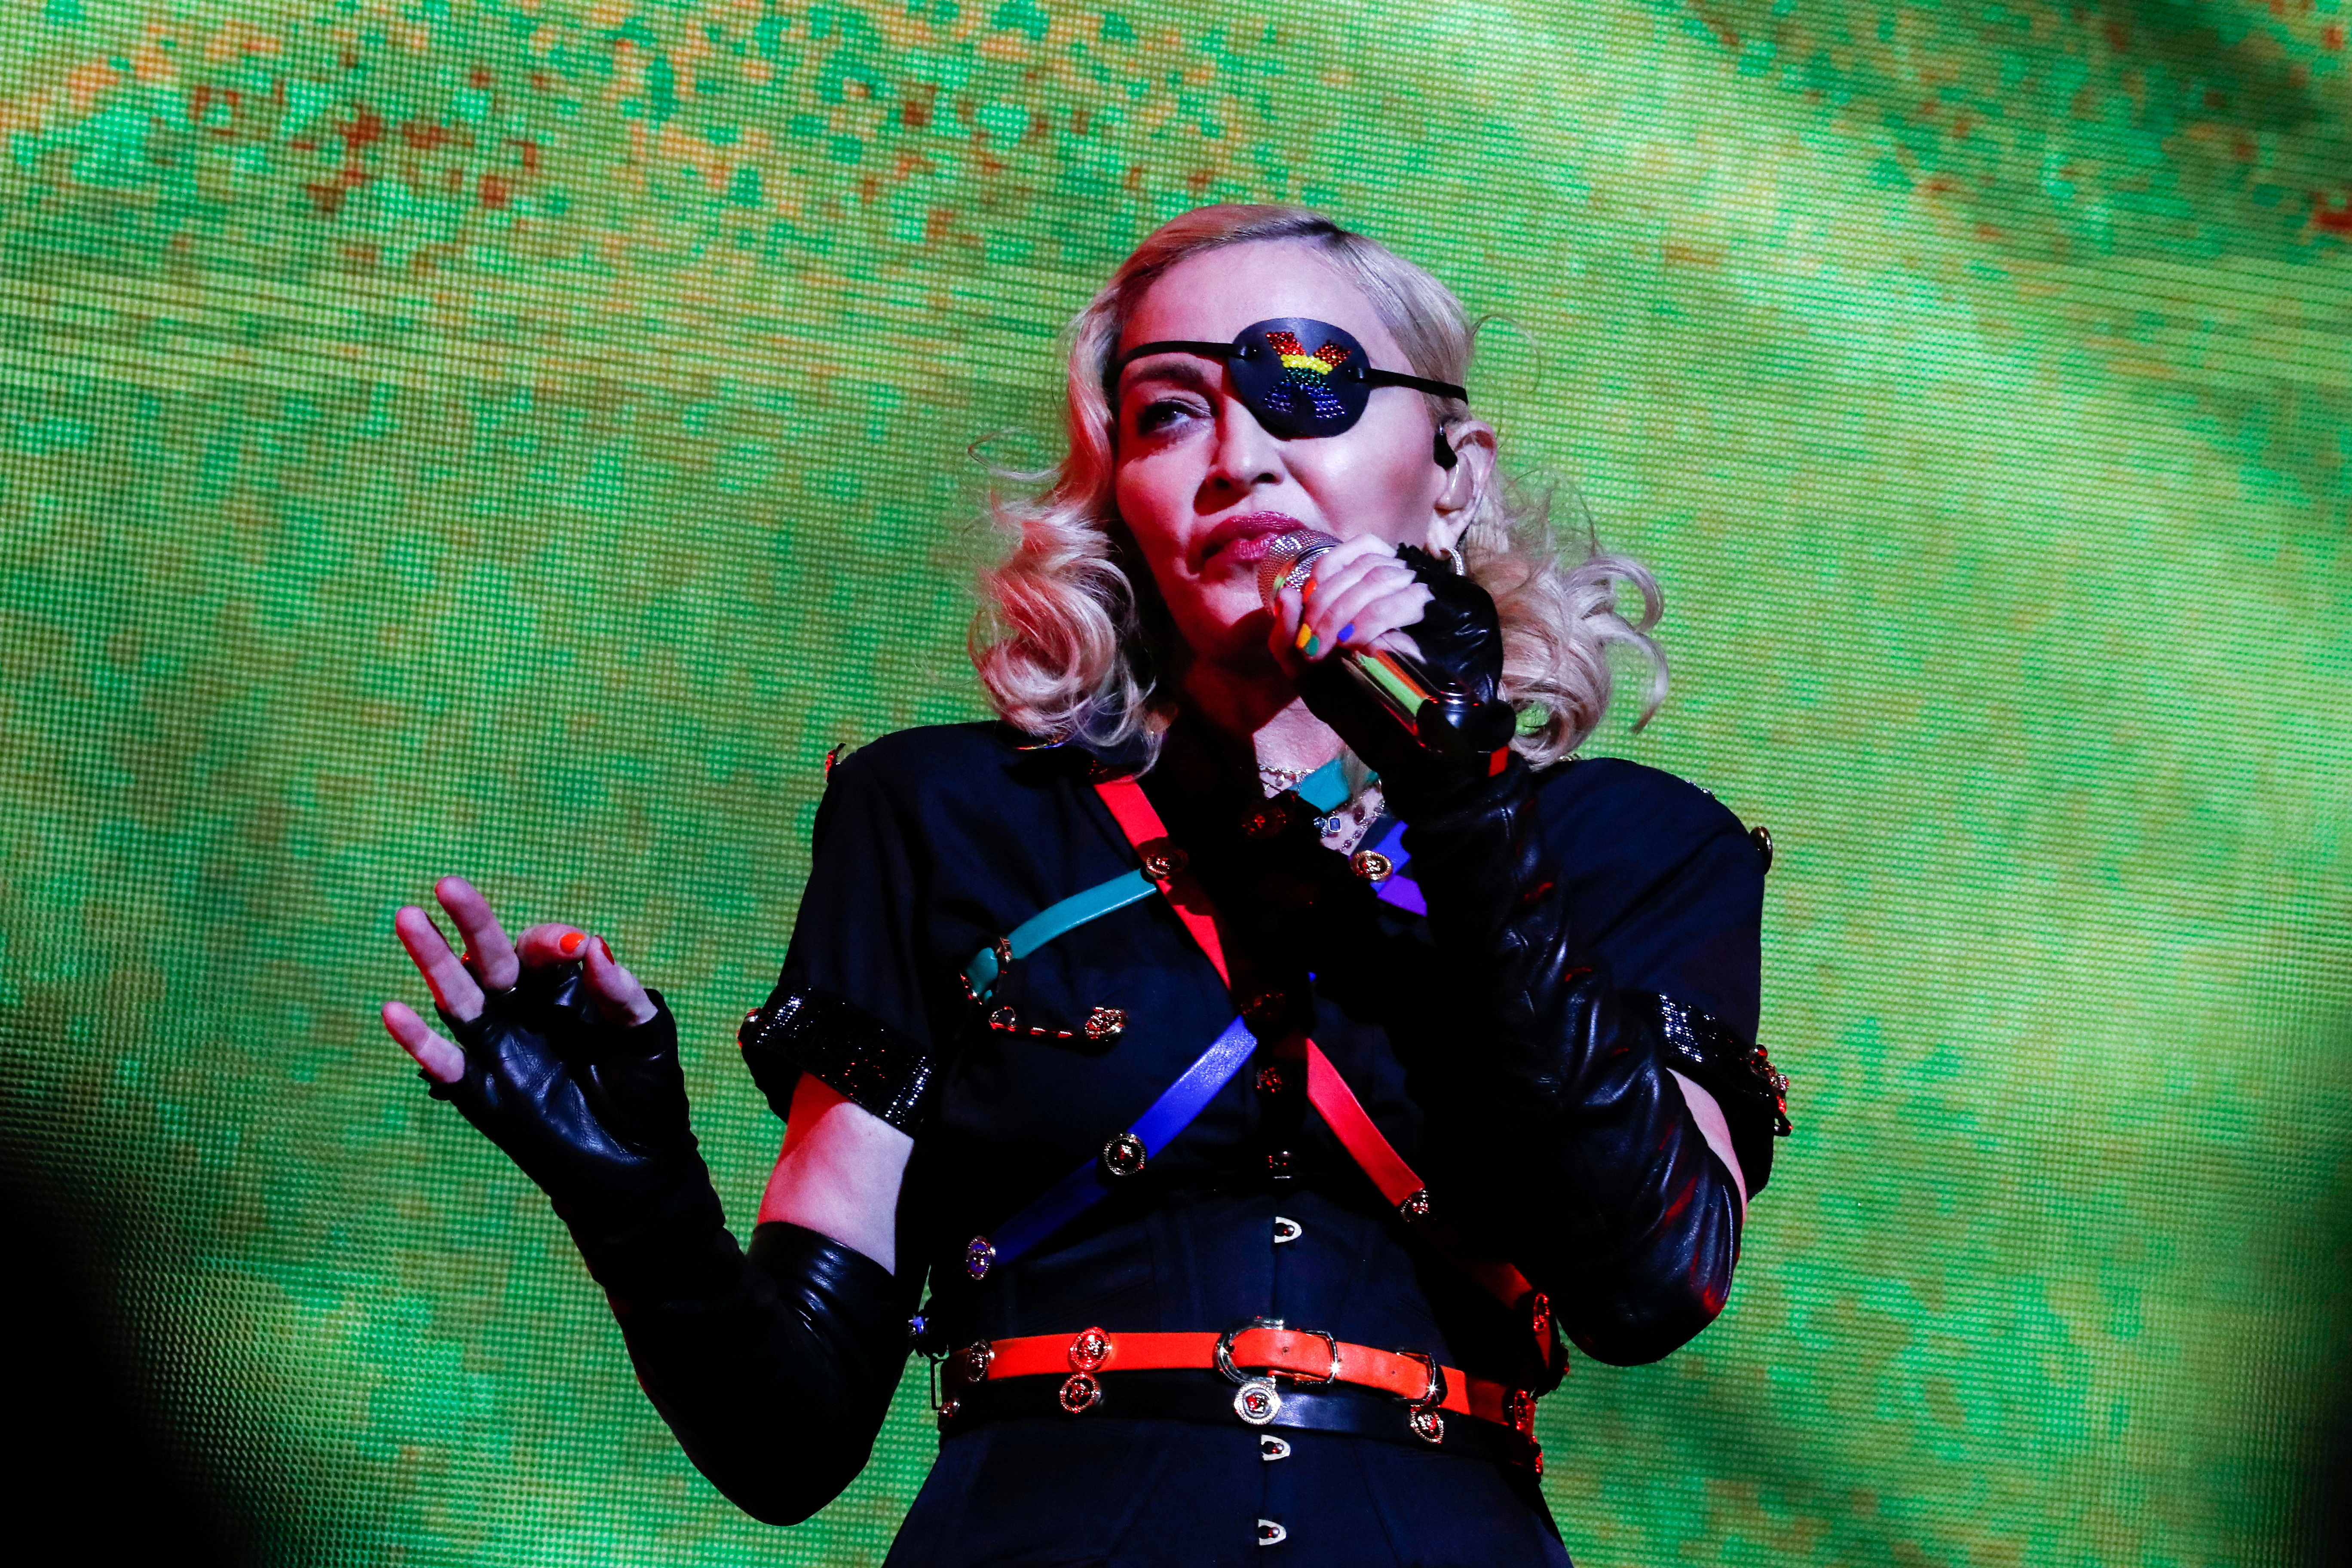 Madonna tour: Singer gives update after bacterial infection, ICU stay